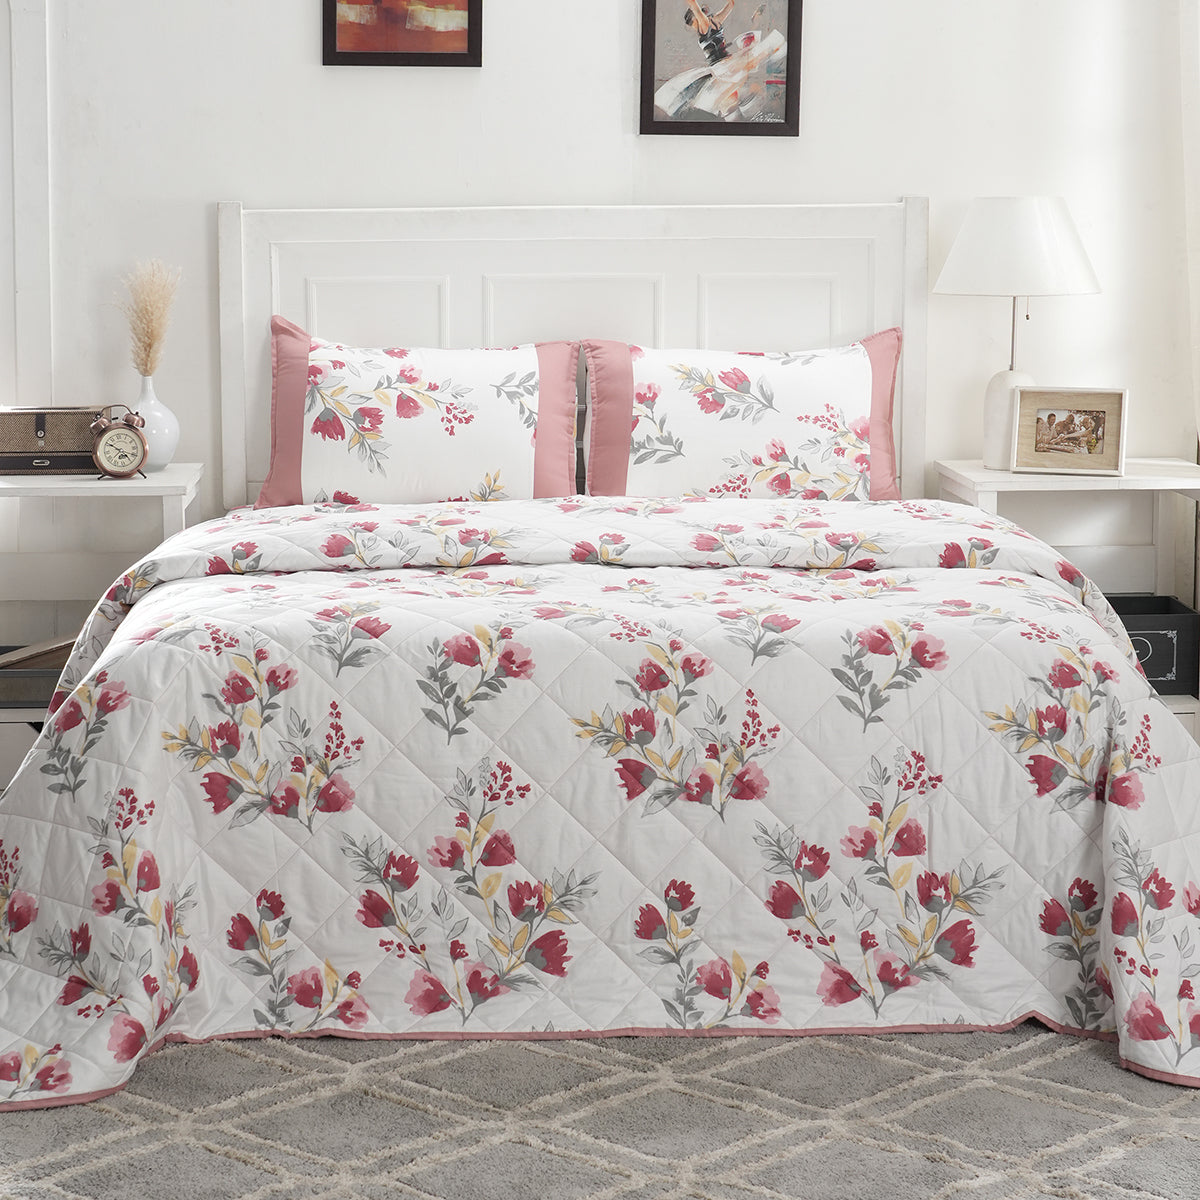 Royal Botanic Floral Leaves Print Multi 4PC Quilt/Quilted Bed Cover Set